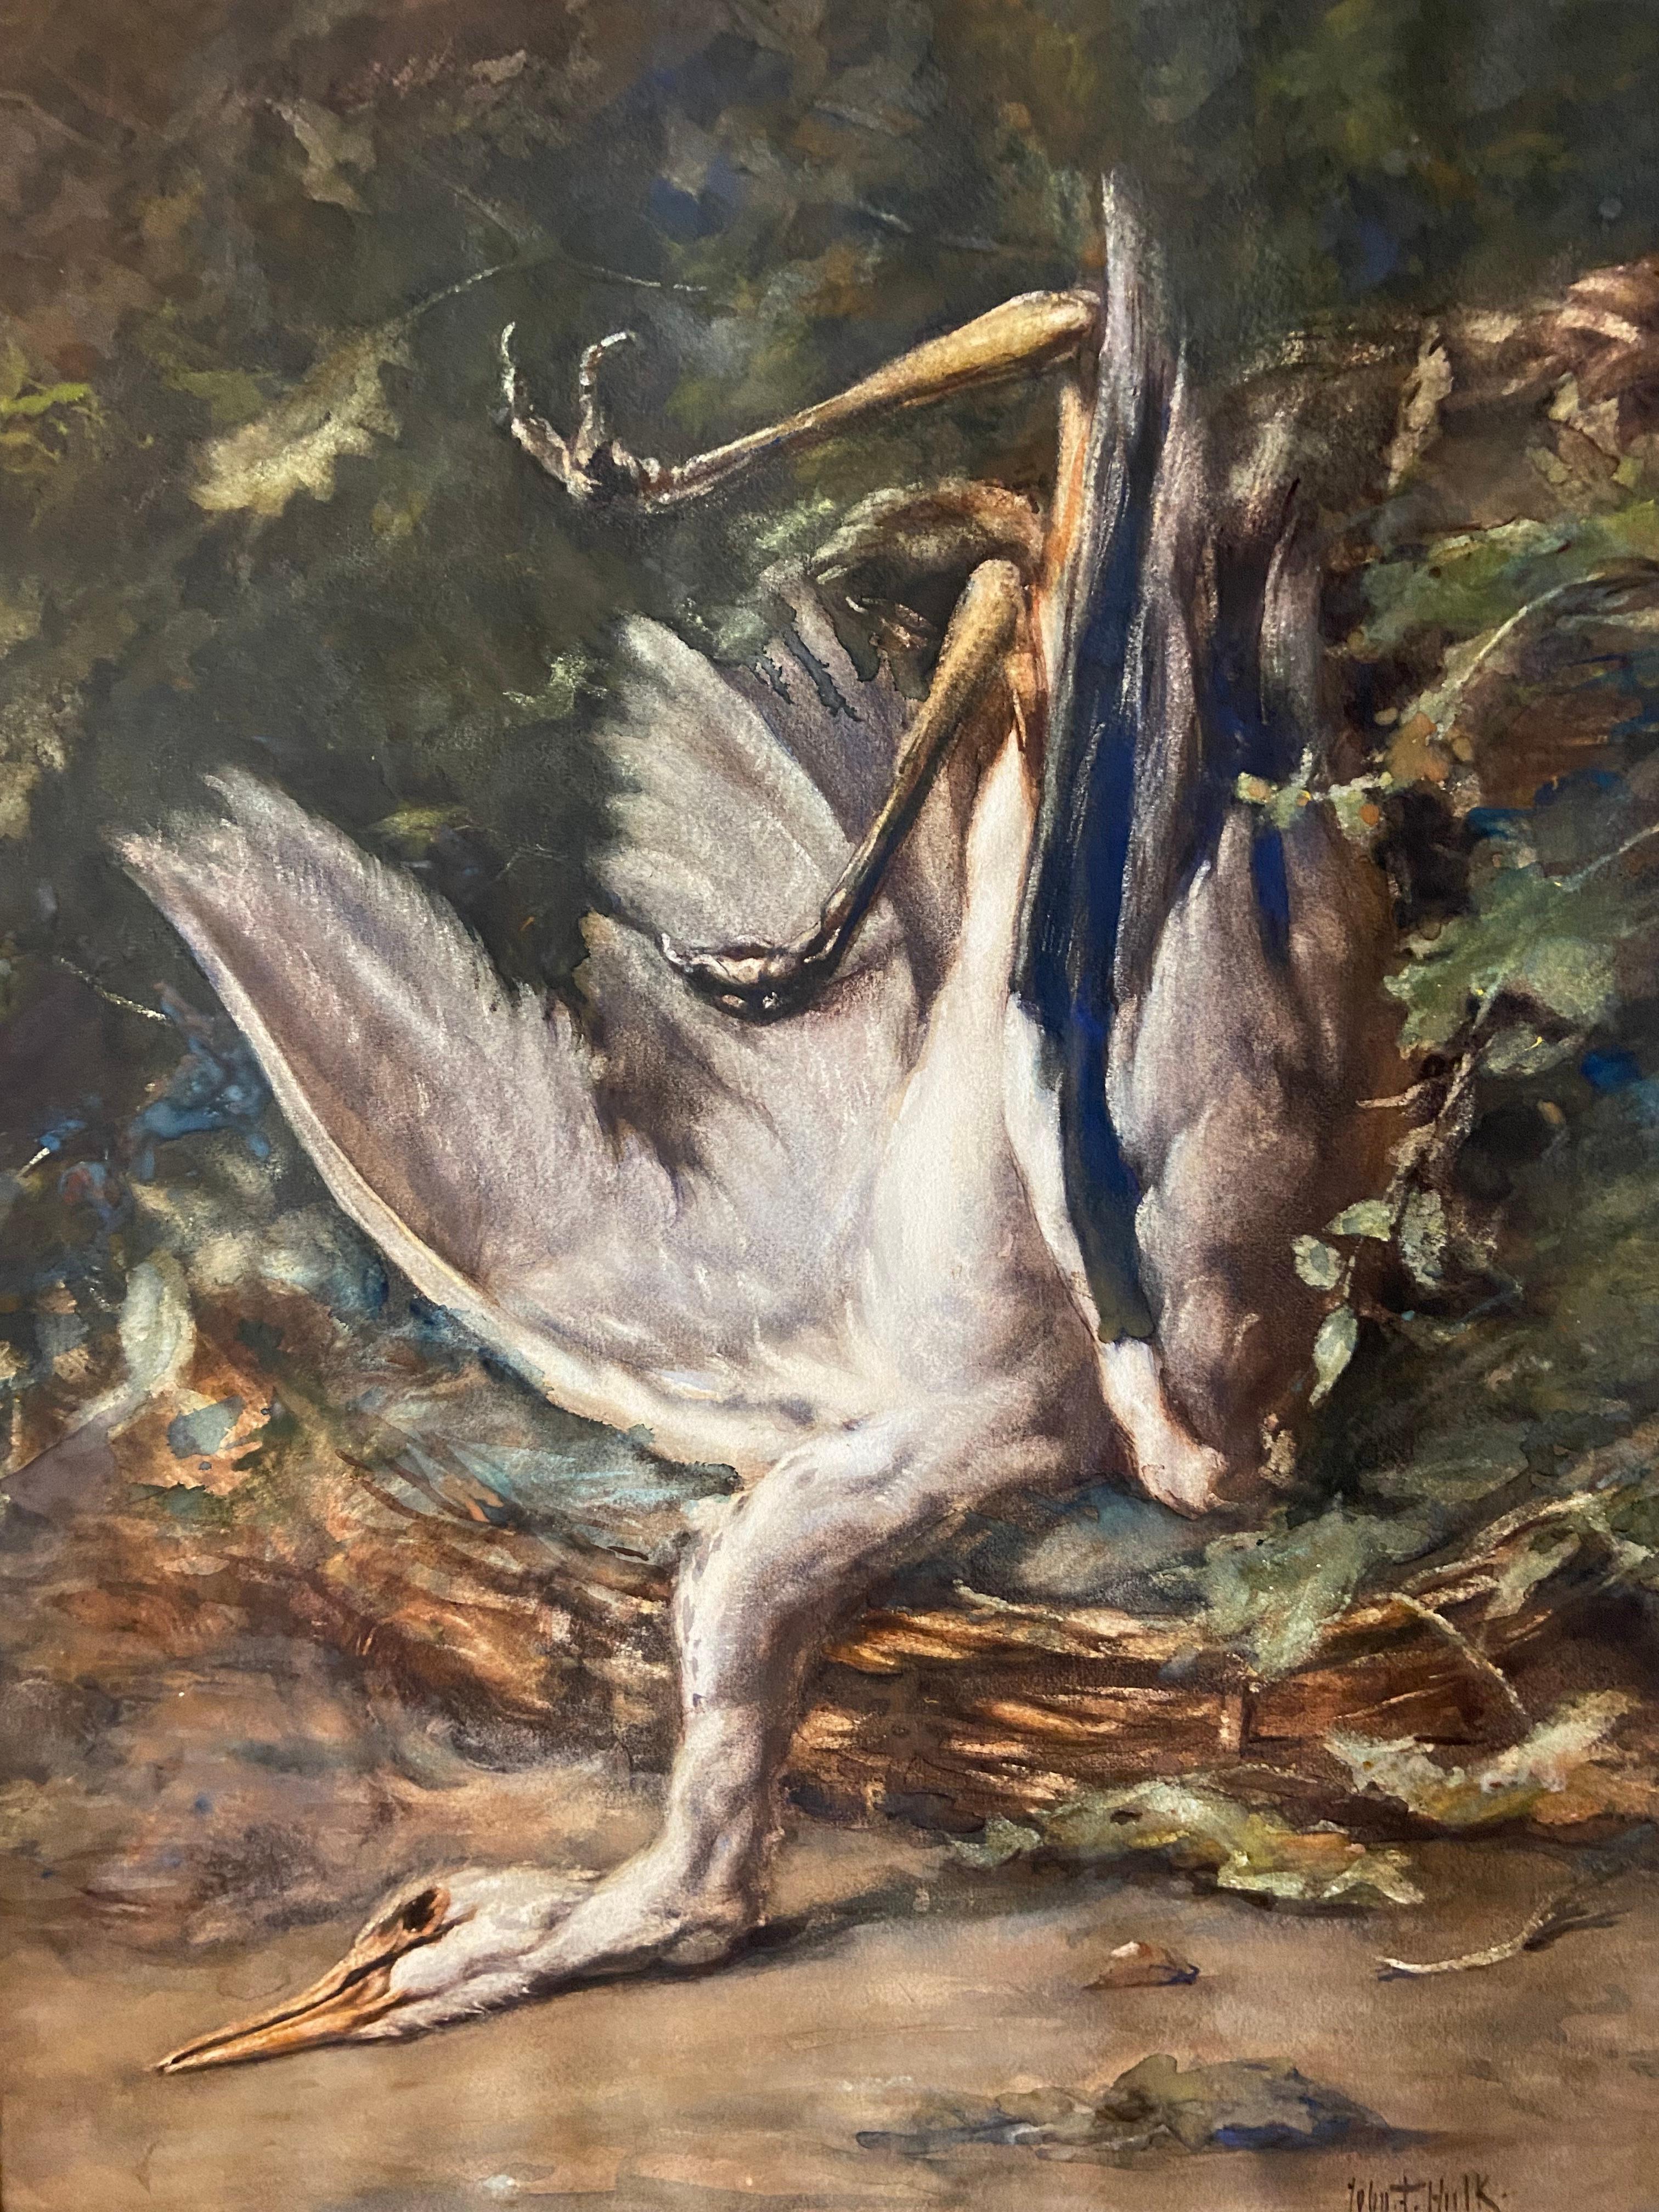 Dead heron by Johannes Frederik Hulk ( 1829 - 1911), work on paper. 
Signed: John F. Hulk, 1909
Behind glass, with an impressive gilde frame.

Johannes Frederik Hulk Sr. was a Dutch painter, draftsman, photographer, and owner of a paint supplies